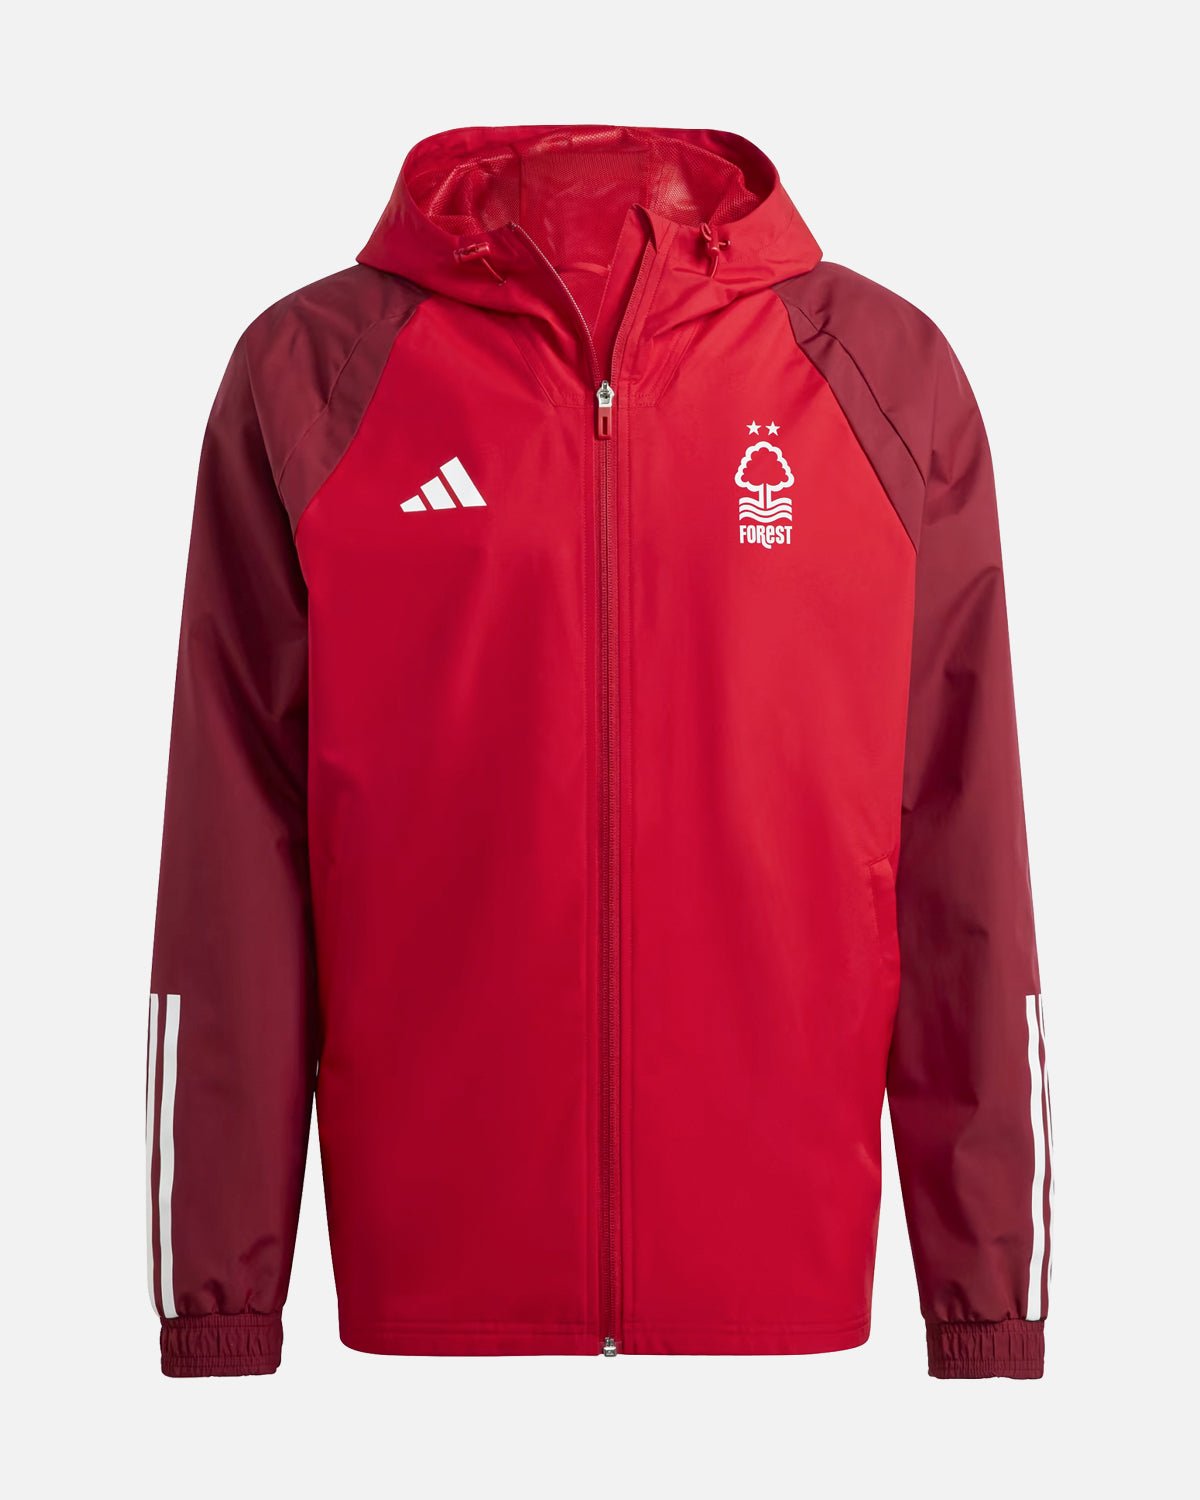 NFFC Red All Weather Training Jacket 23-24 - Nottingham Forest FC